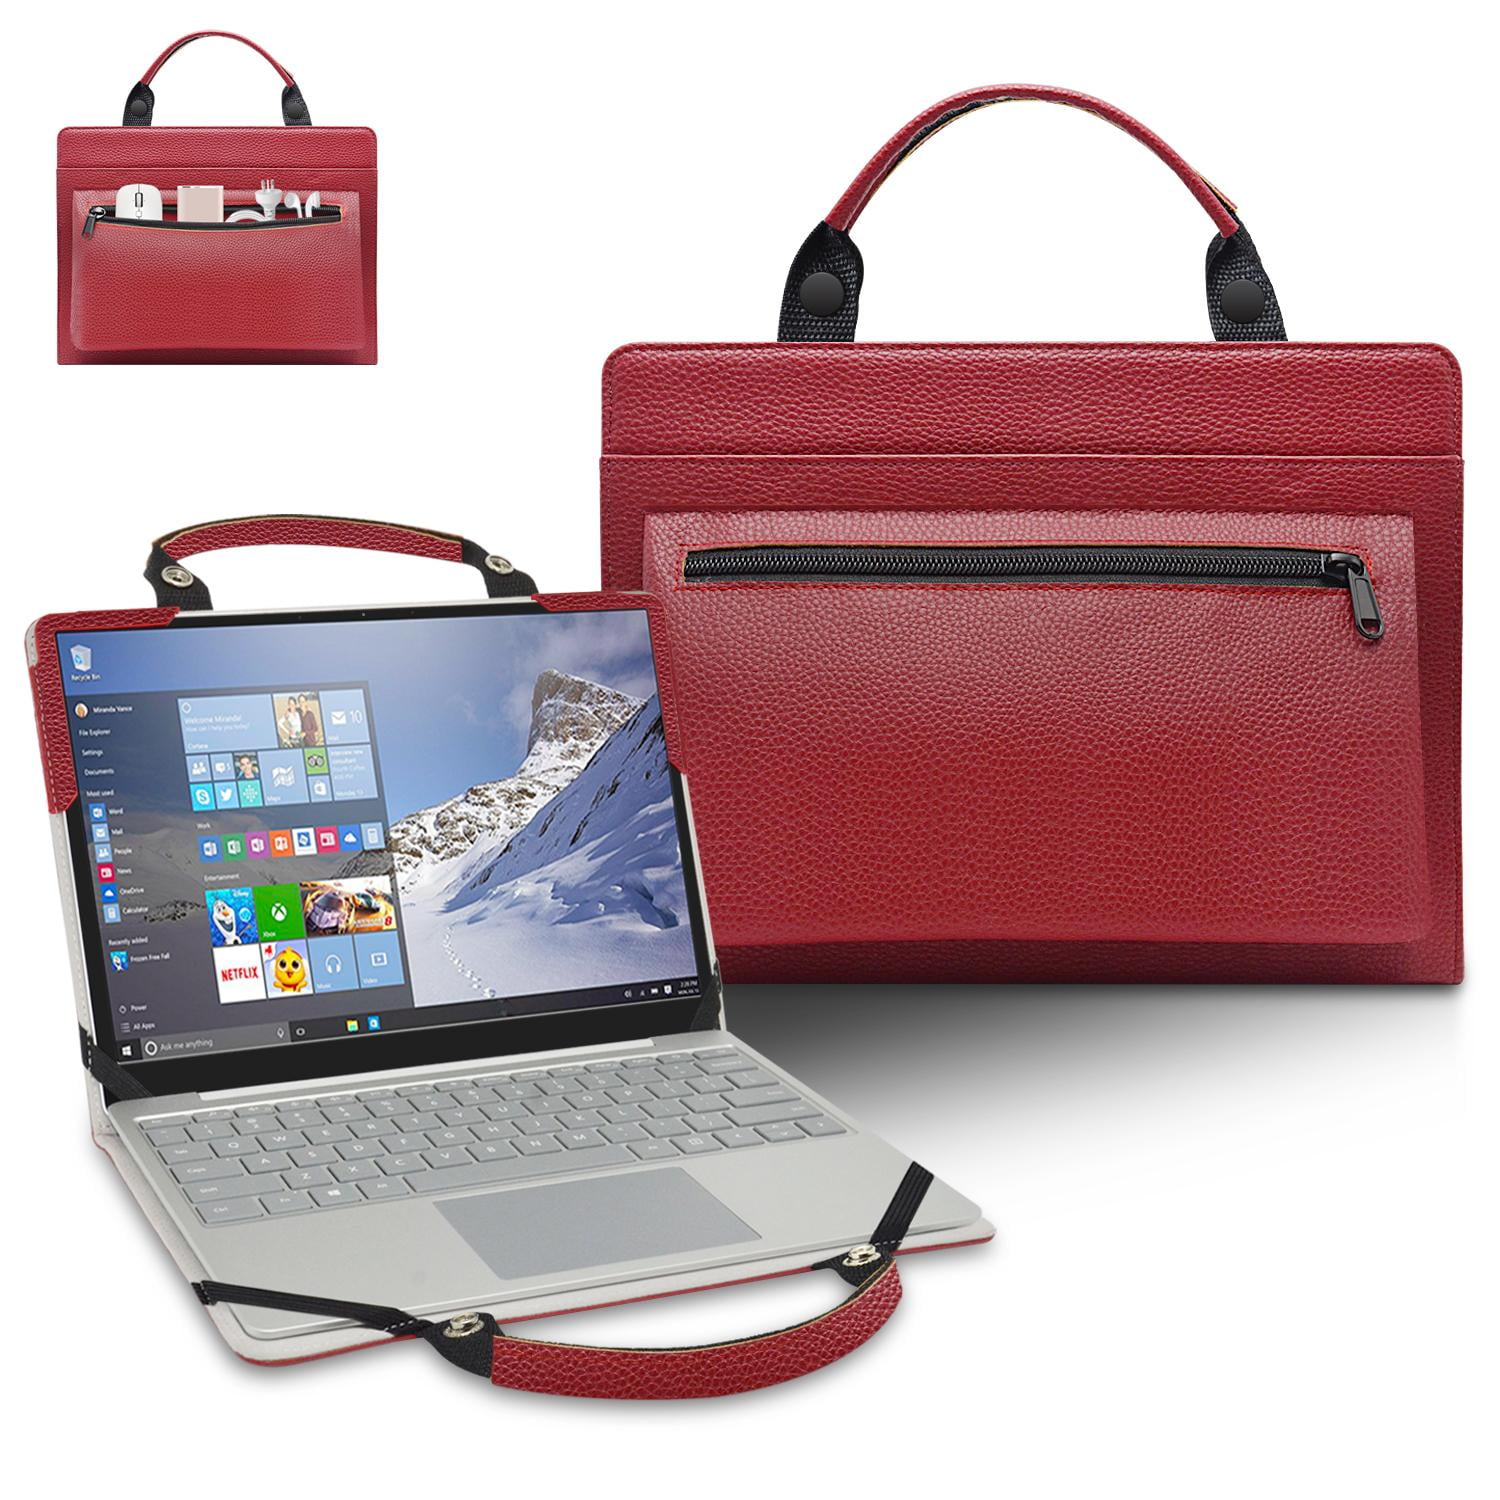 Tablet Travel Cover,Phoenix Laptop Sleeve Bag Compatible with 10-17 Inch Netbook/Laptop 10 Inch 